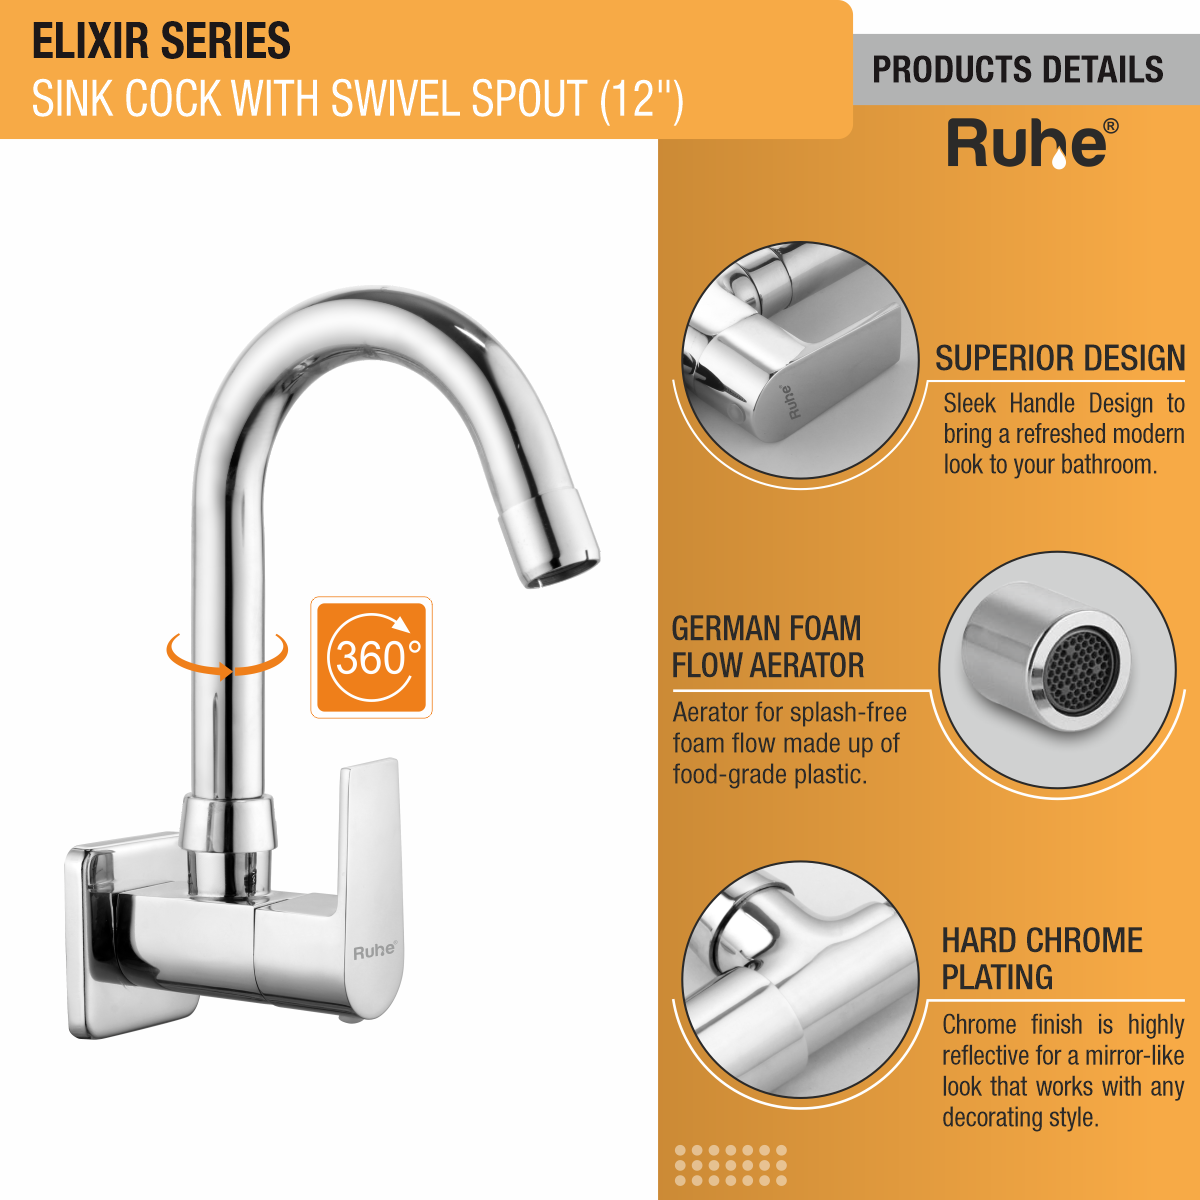 Elixir Sink Tap With Small (12 inches) Round Swivel Spout Faucet product details